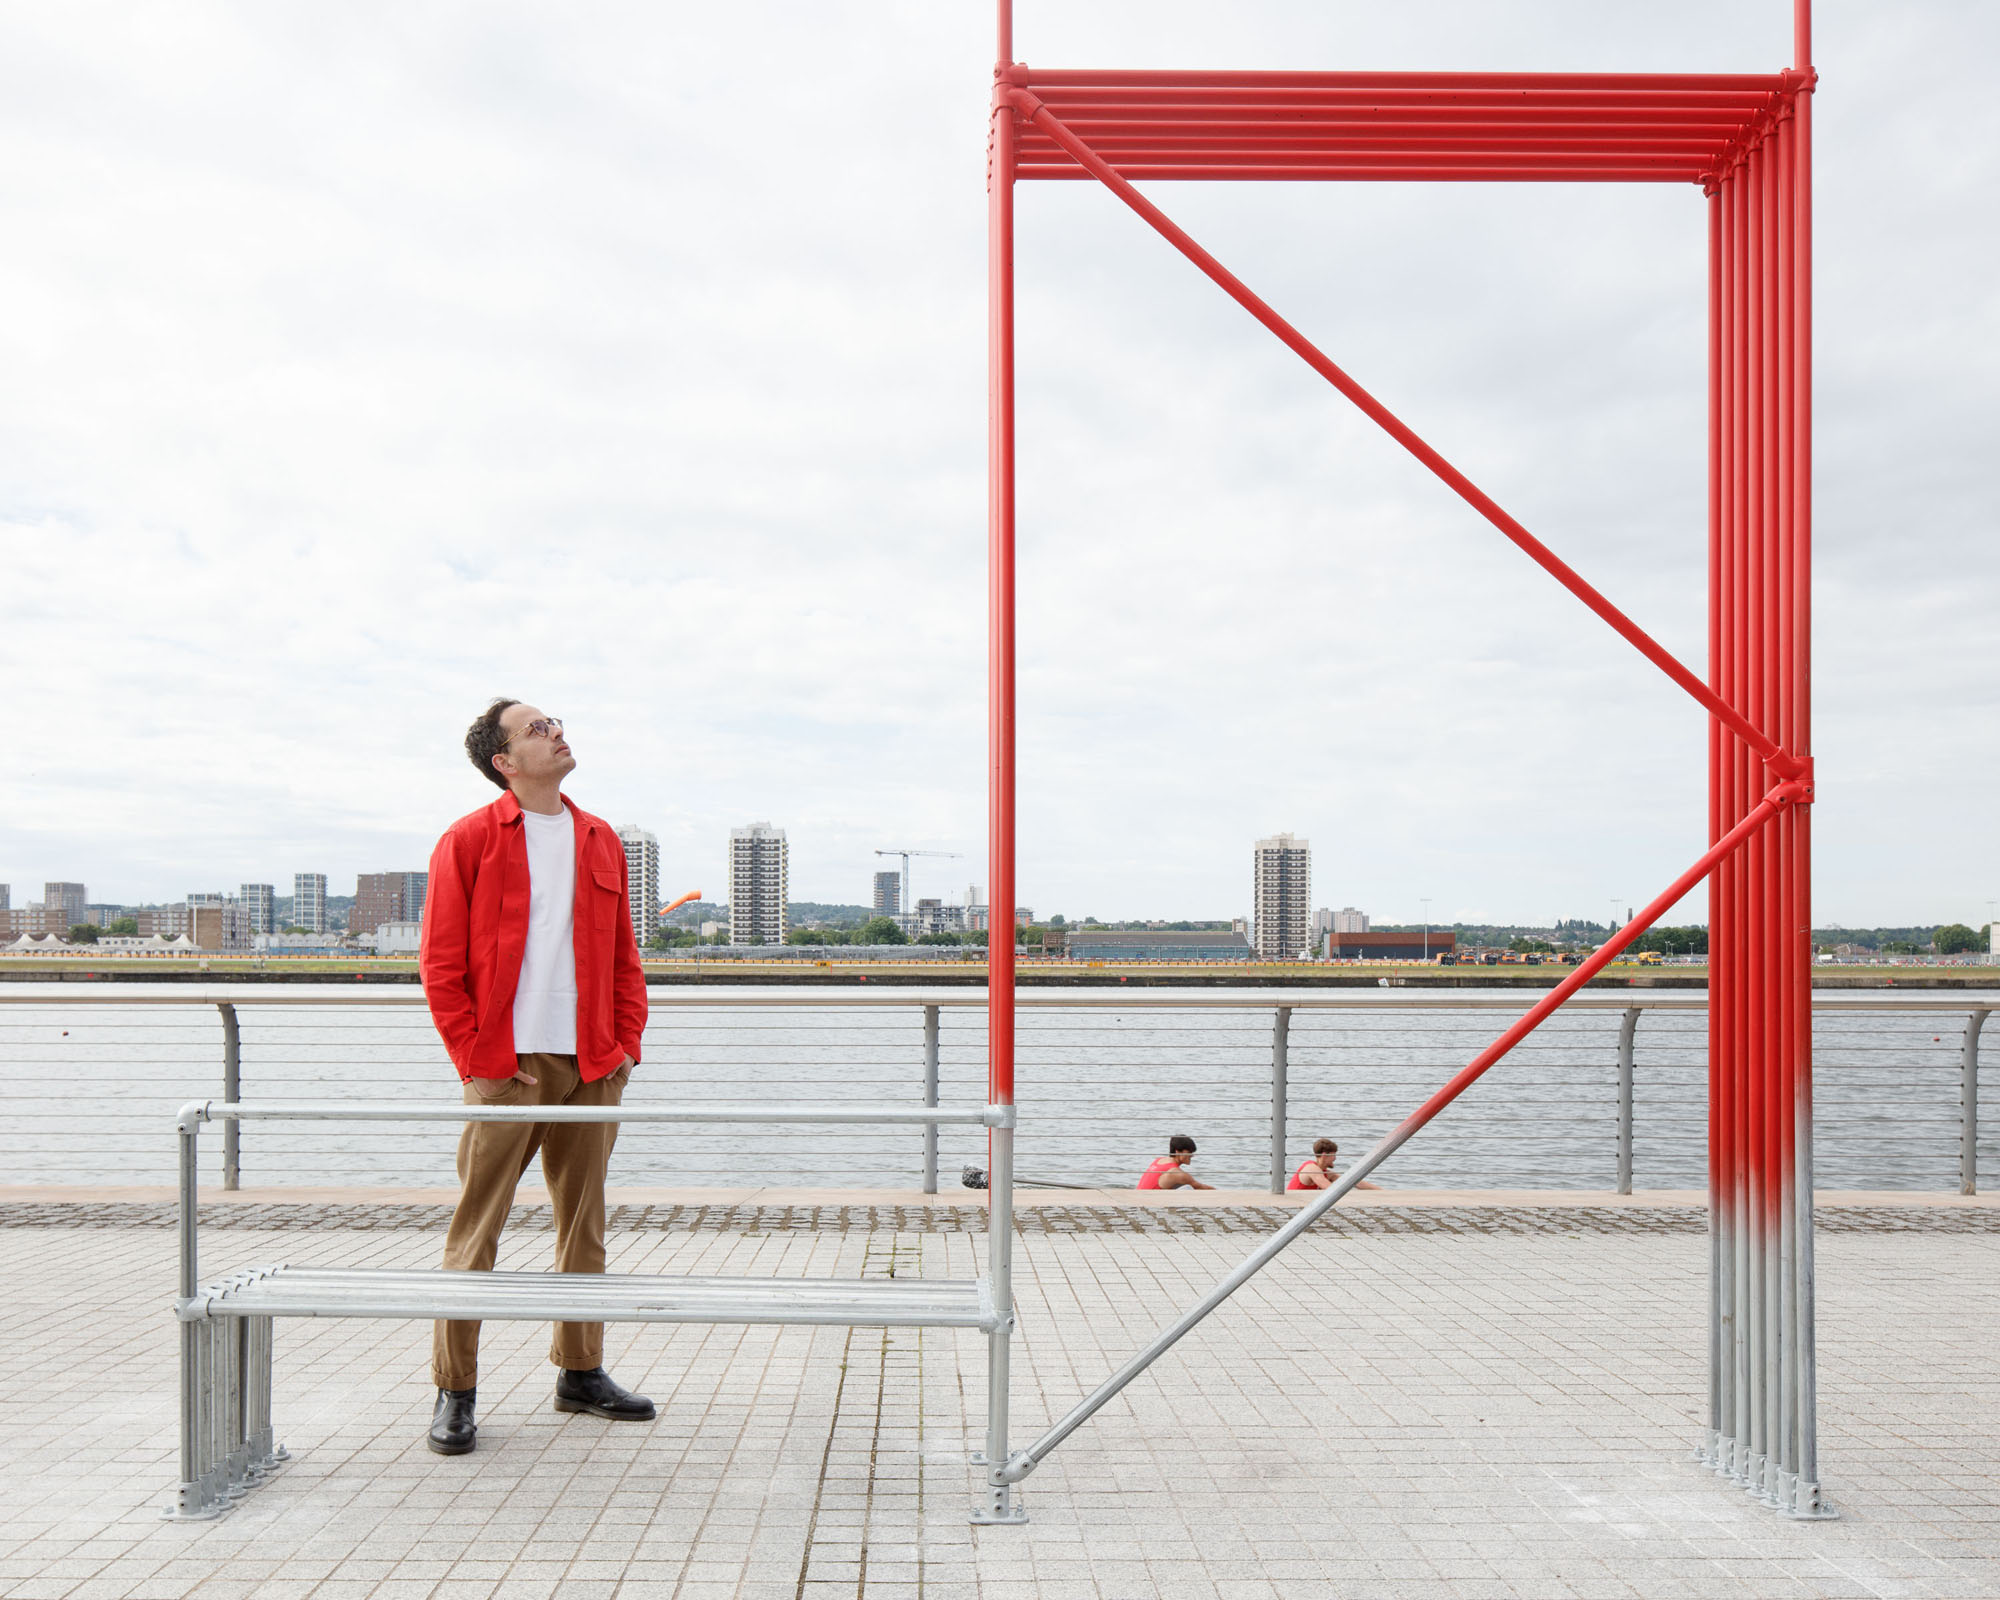 man in a red jacket standing next to a red sculpture by the water